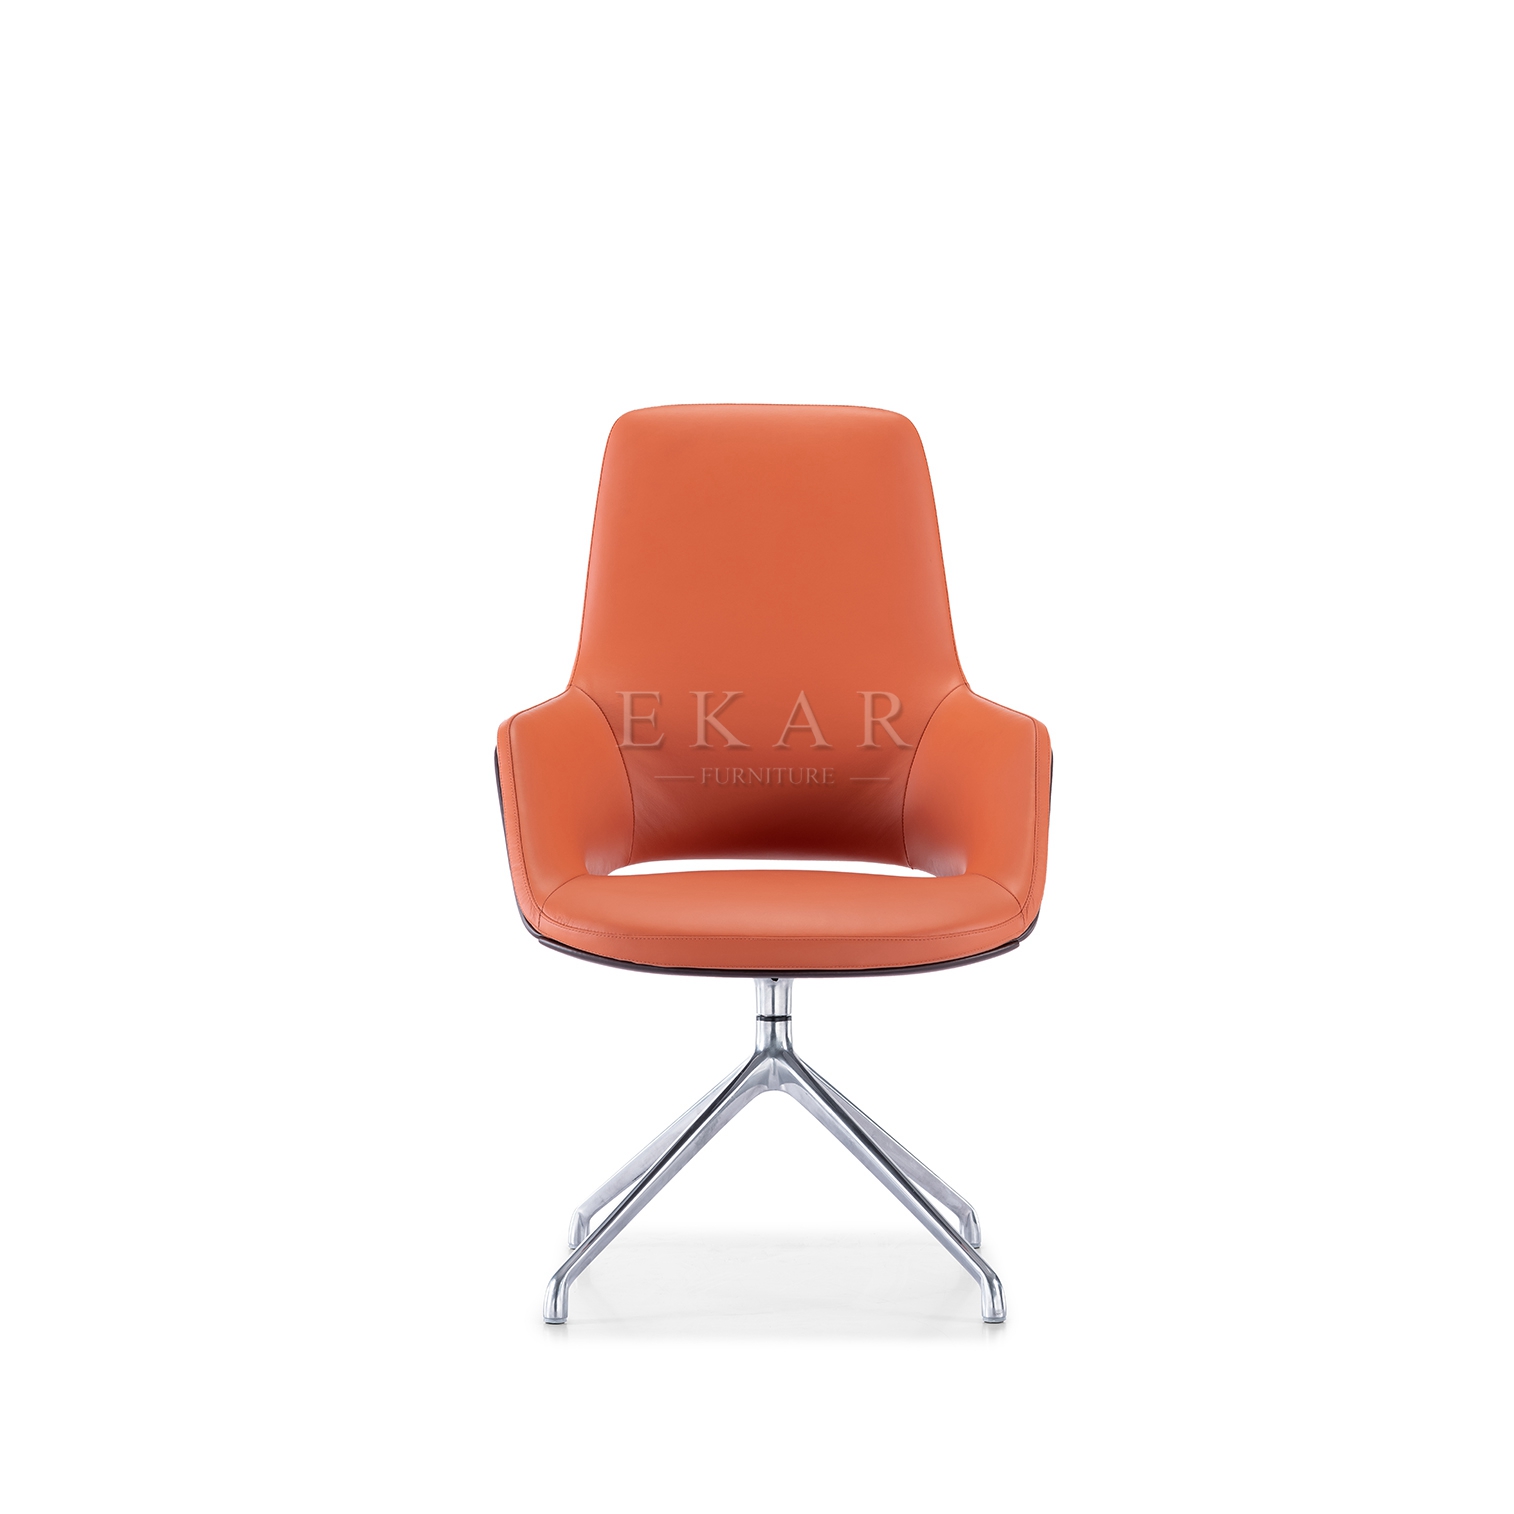 Modern Design Colorful furniture Comfort office Meeting visitor leisure Arms Swivel chair